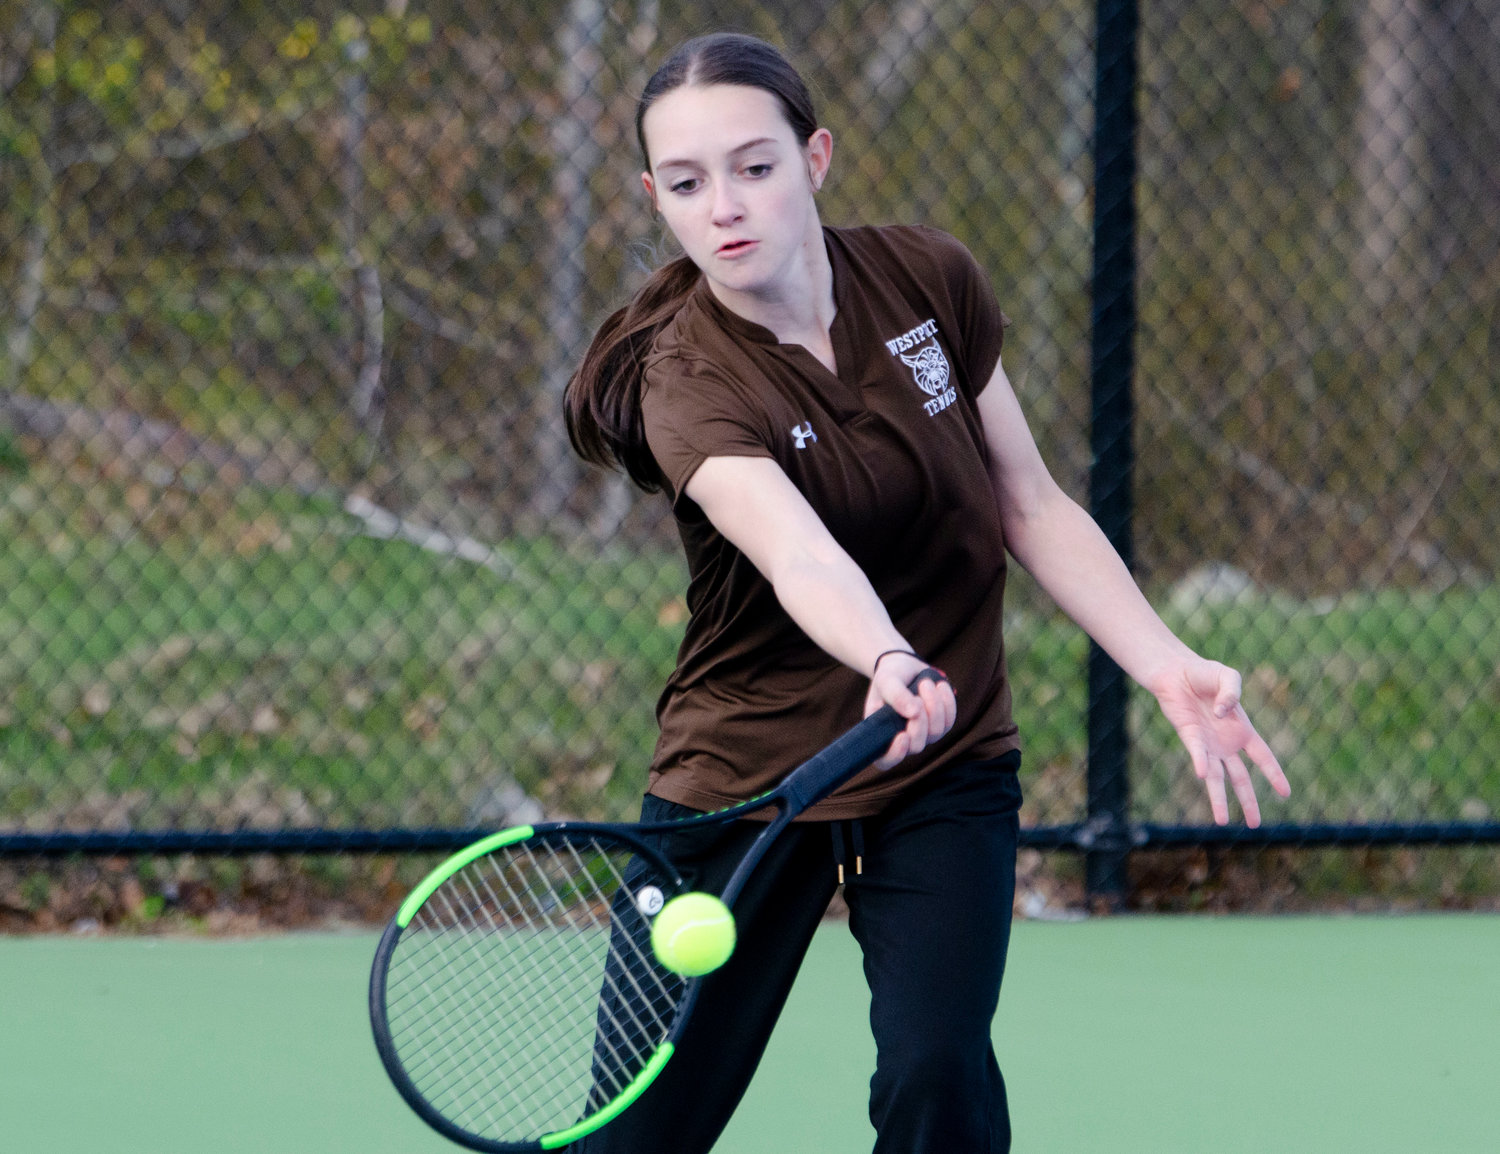 Wildcats first singles player Kaelyn Jones beat Bishop Connolly's Rebecca Colangri, 6-0, 6-0. The Wildcats are now 3-2 as they play three games this week.